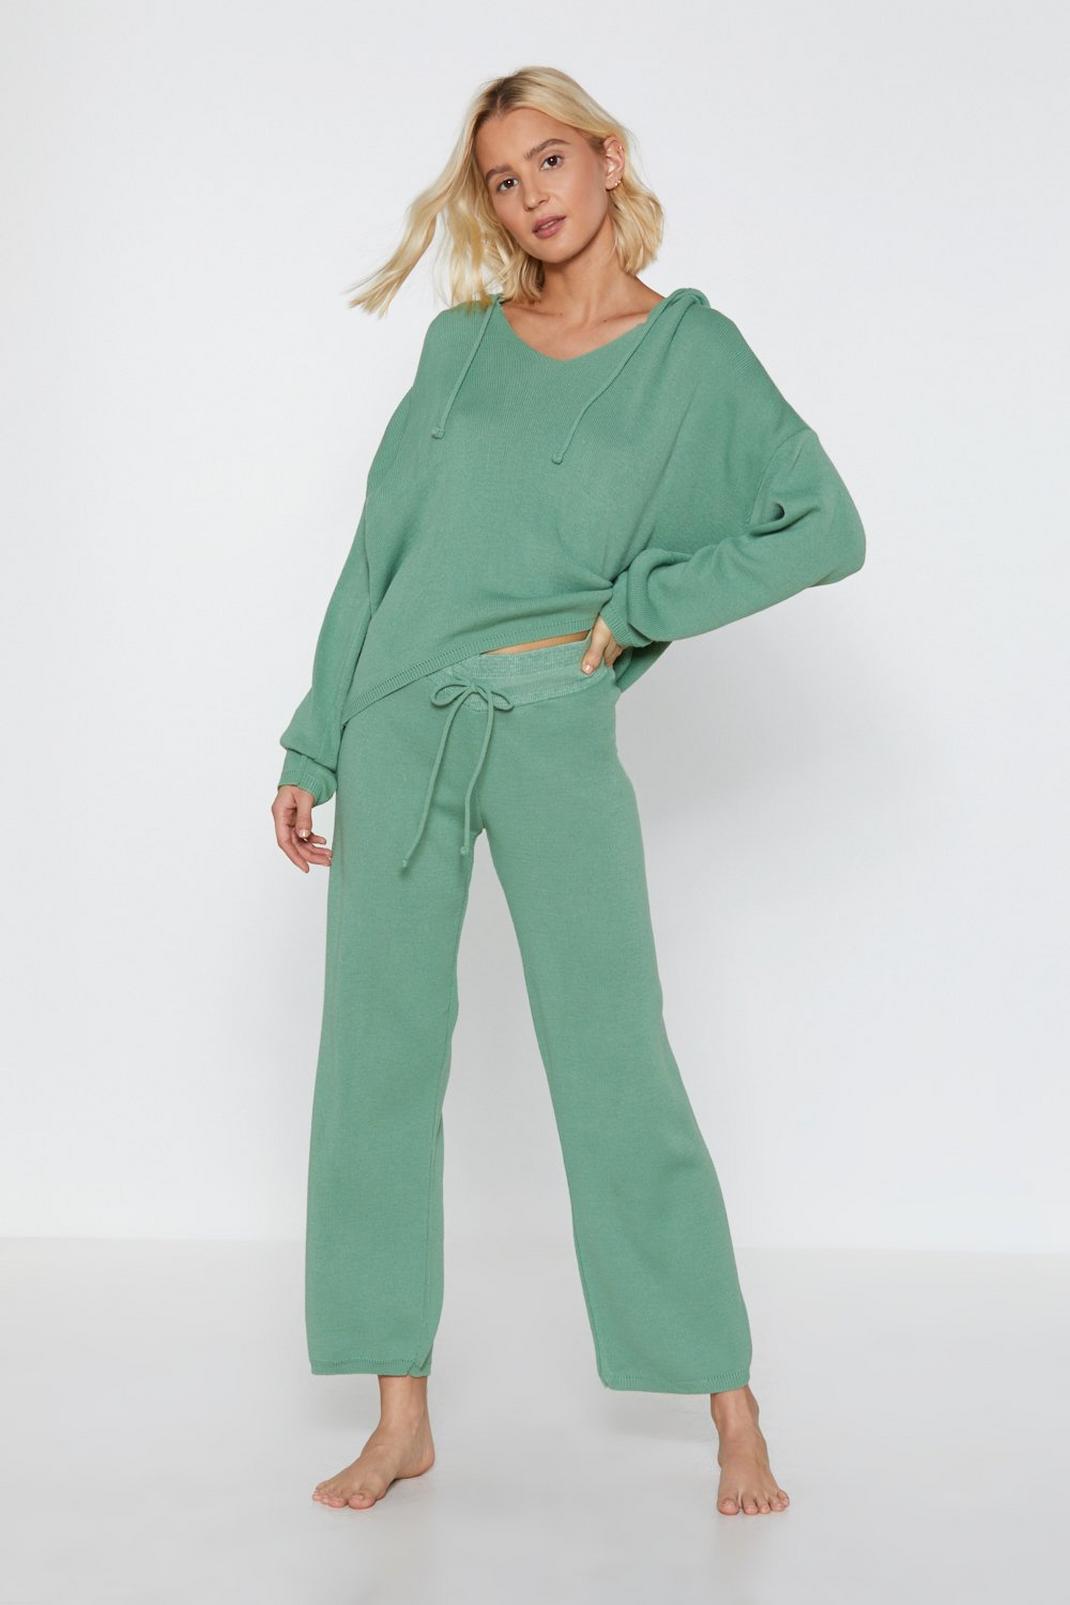 https://media.nastygal.com/i/nastygal/agg78136_sage_xl/female-sage-by-your-side-sweater-and-wide-leg-pants-set/?w=1070&qlt=default&fmt.jp2.qlt=70&fmt=auto&sm=fit